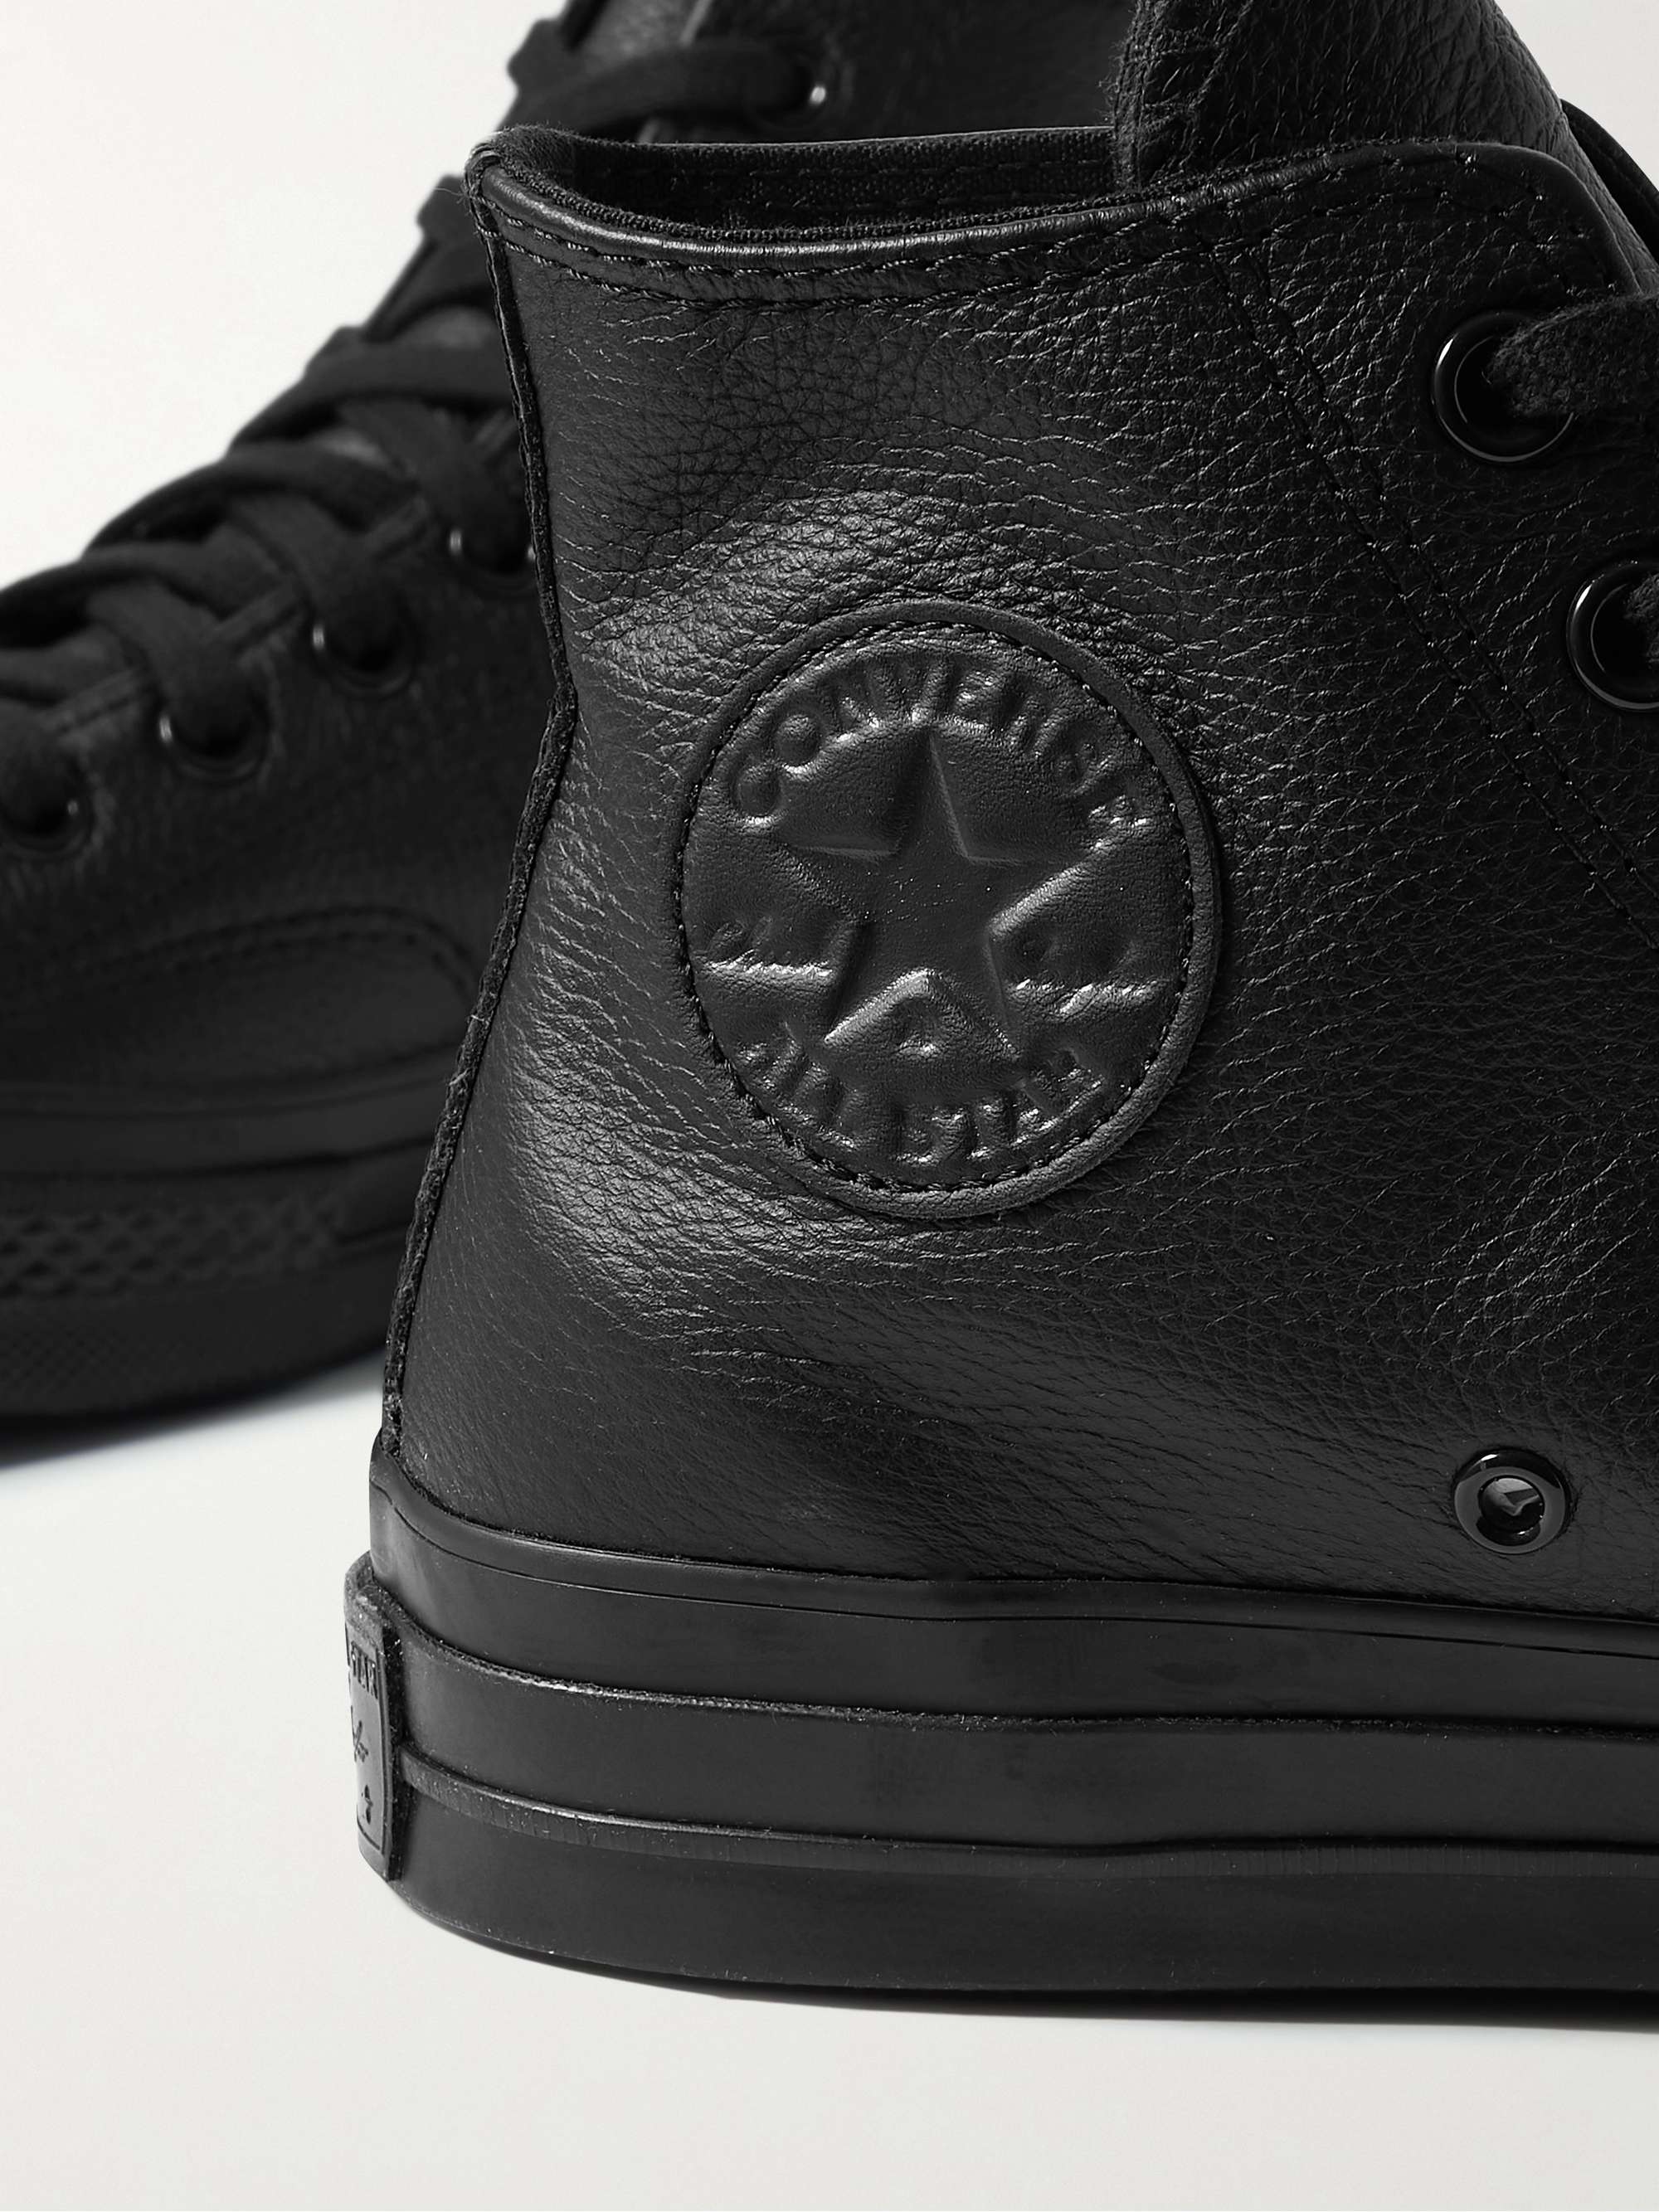 CONVERSE Chuck 70 Full-Grain Leather High-Top Sneakers